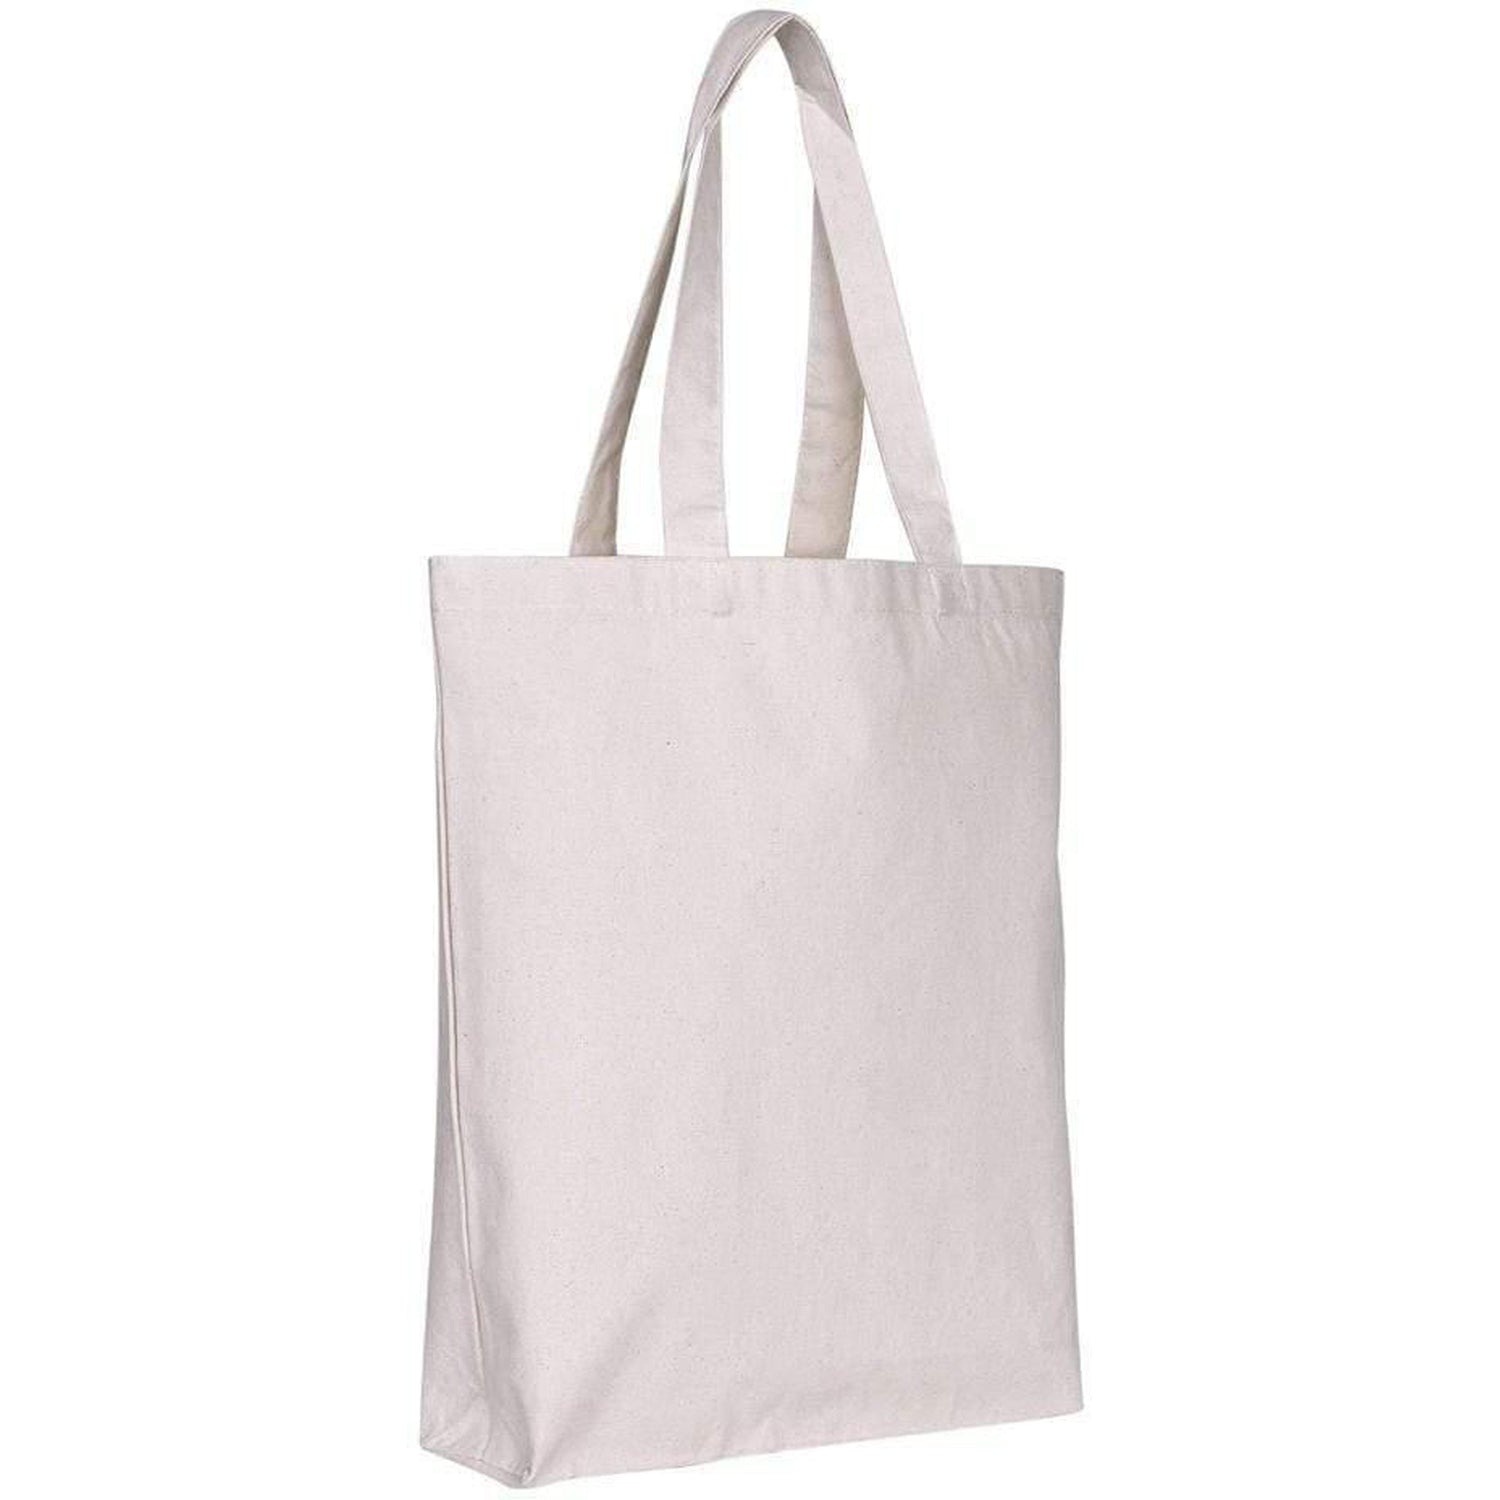 Cheap Blank Canvas Tote Bags | Literacy Ontario Central South